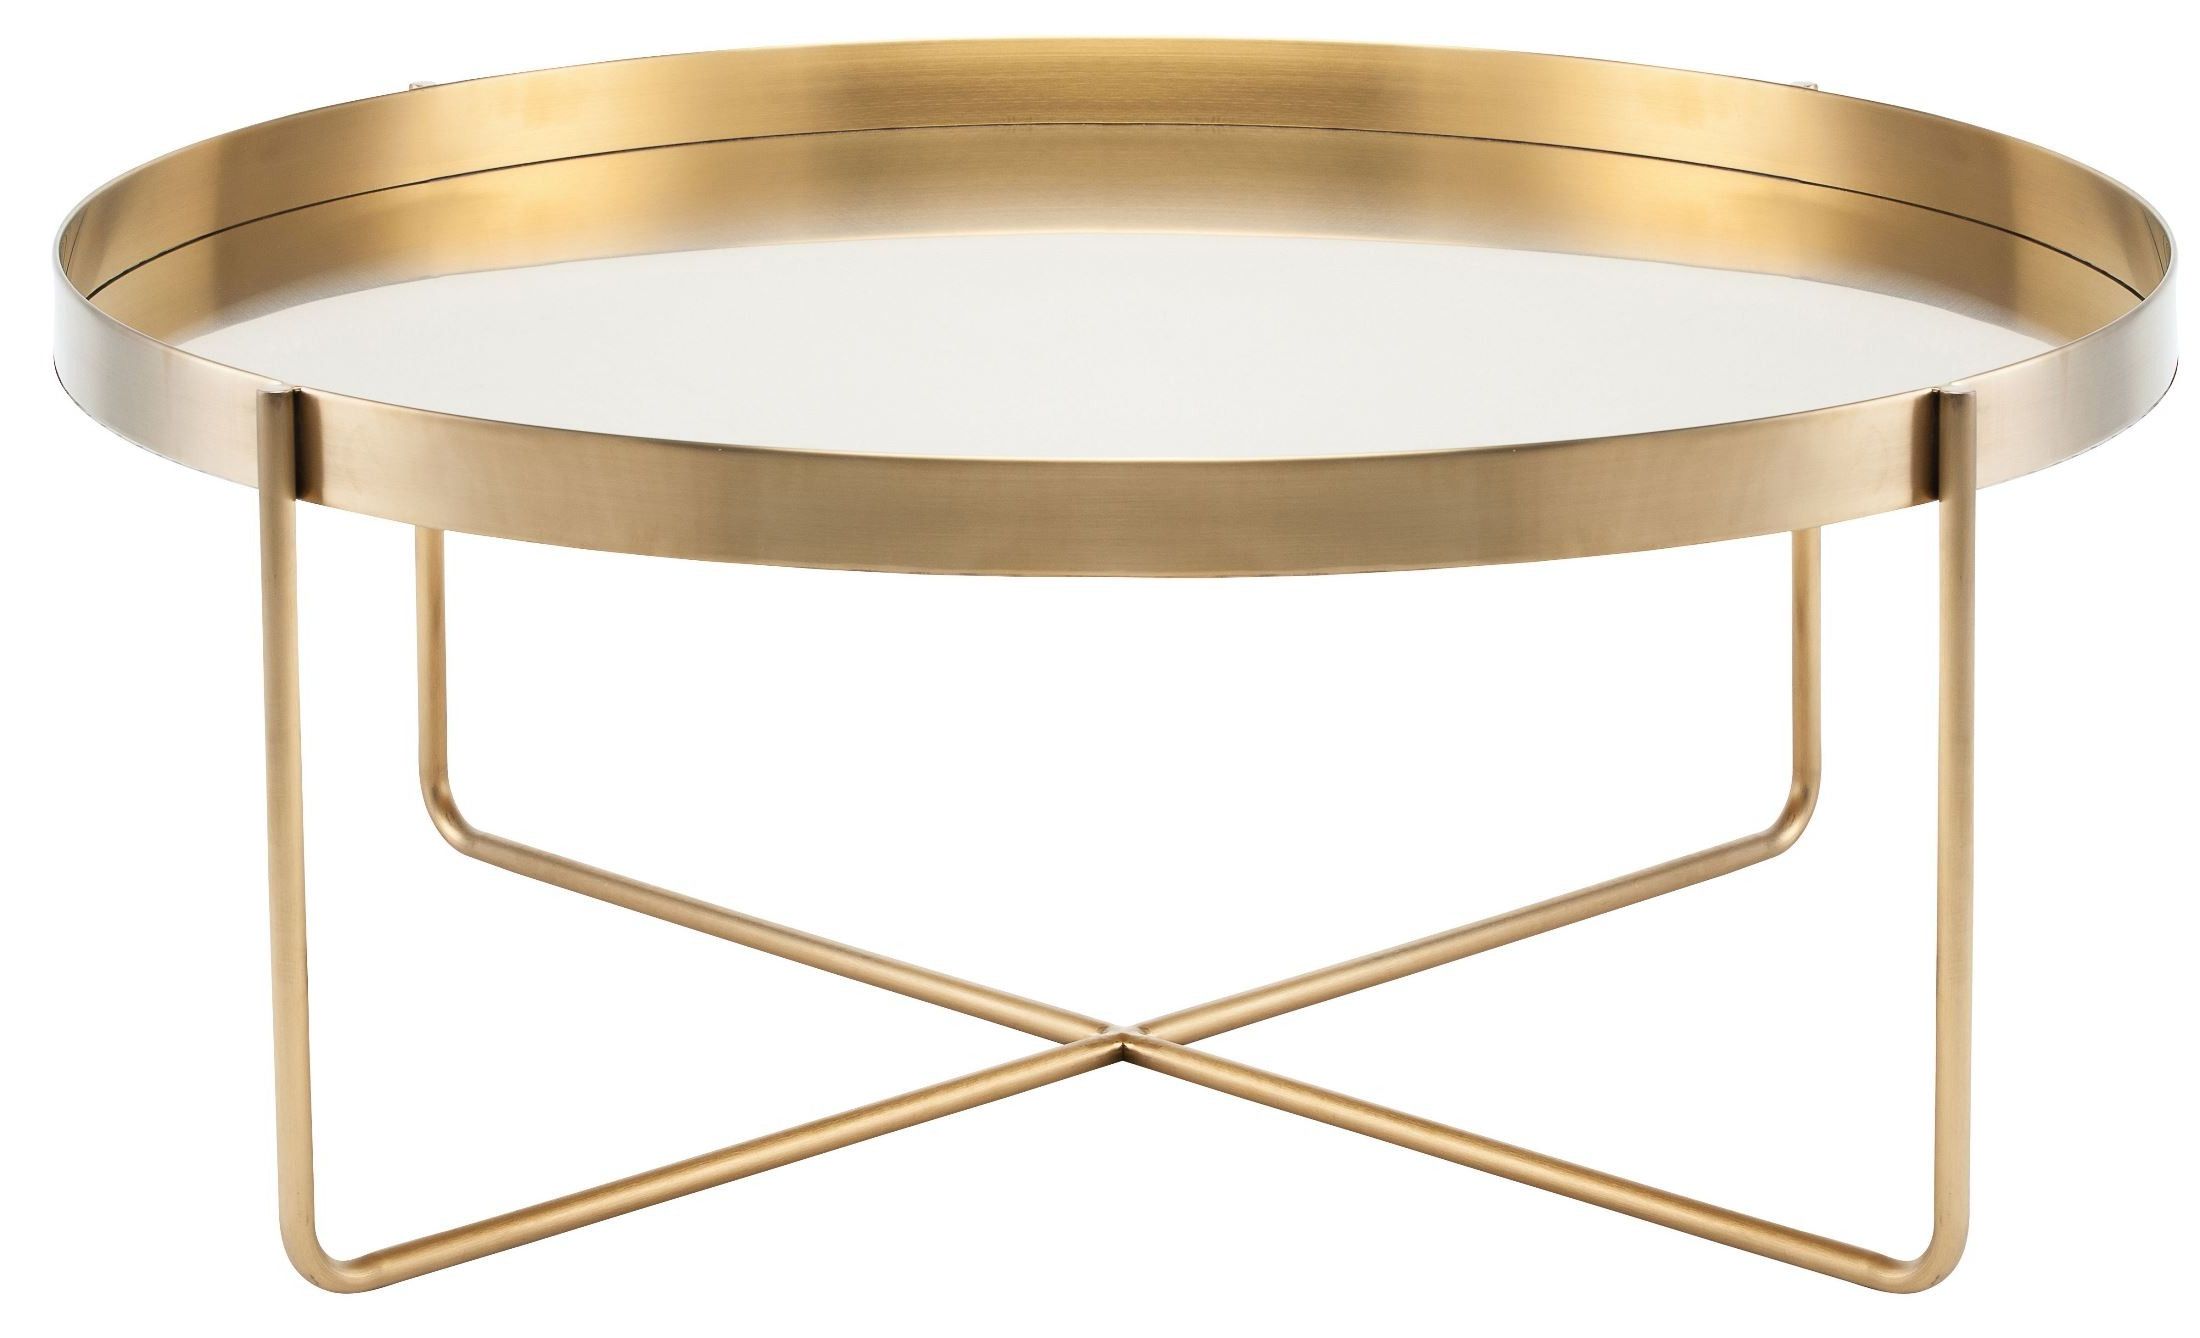 Gaultier 40" Gold Metal Coffee Table, Hgde122, Nuevo With 2020 Antique Gold Aluminum Coffee Tables (Gallery 9 of 20)